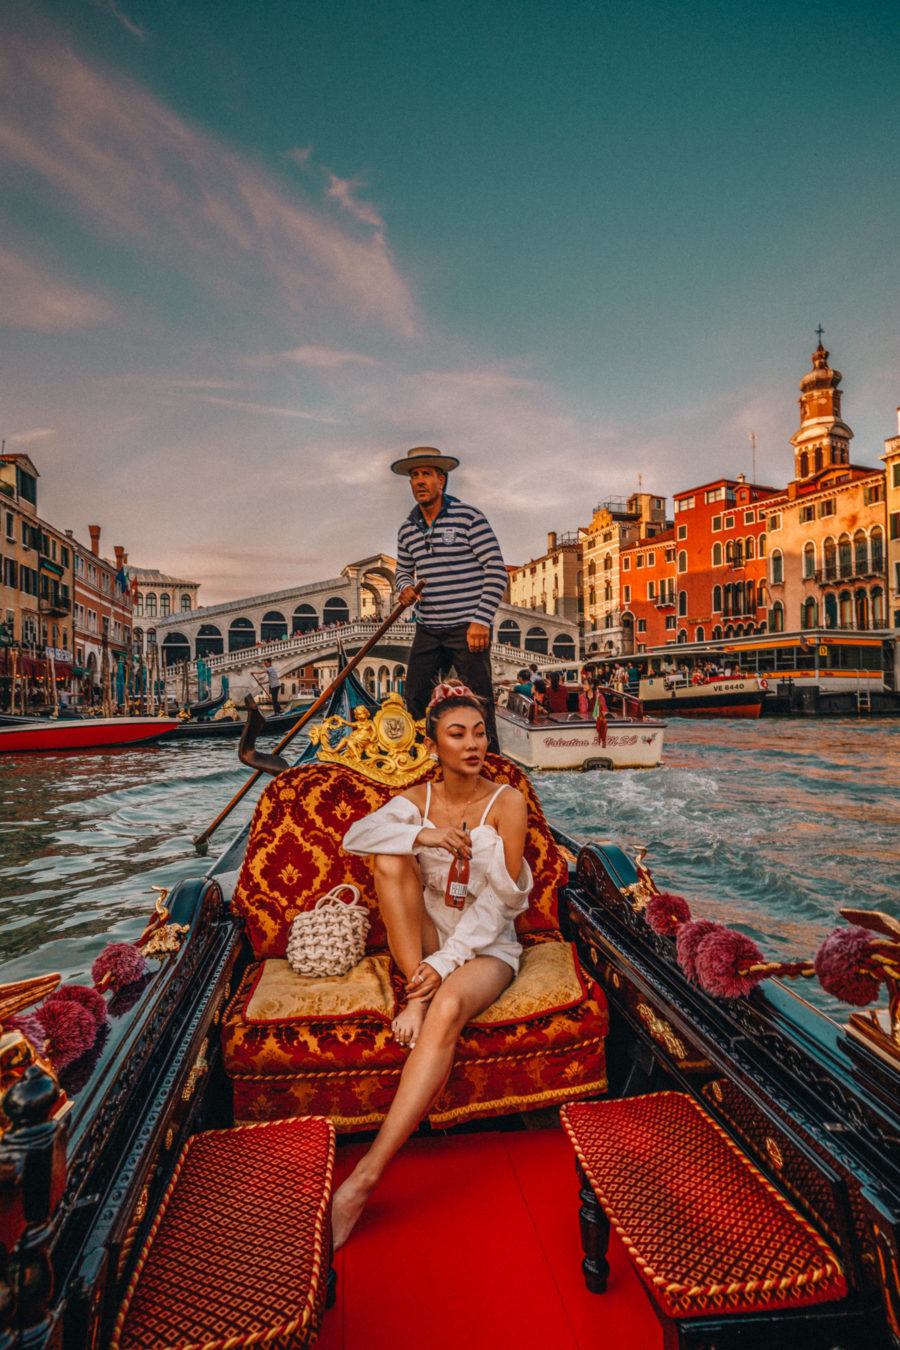 Instagram Outfits in Venice - polka dot dress, venice canals, venice bridge, travel blogger, all white summer outfit, gondola ride in venice // Notjessfashion.com